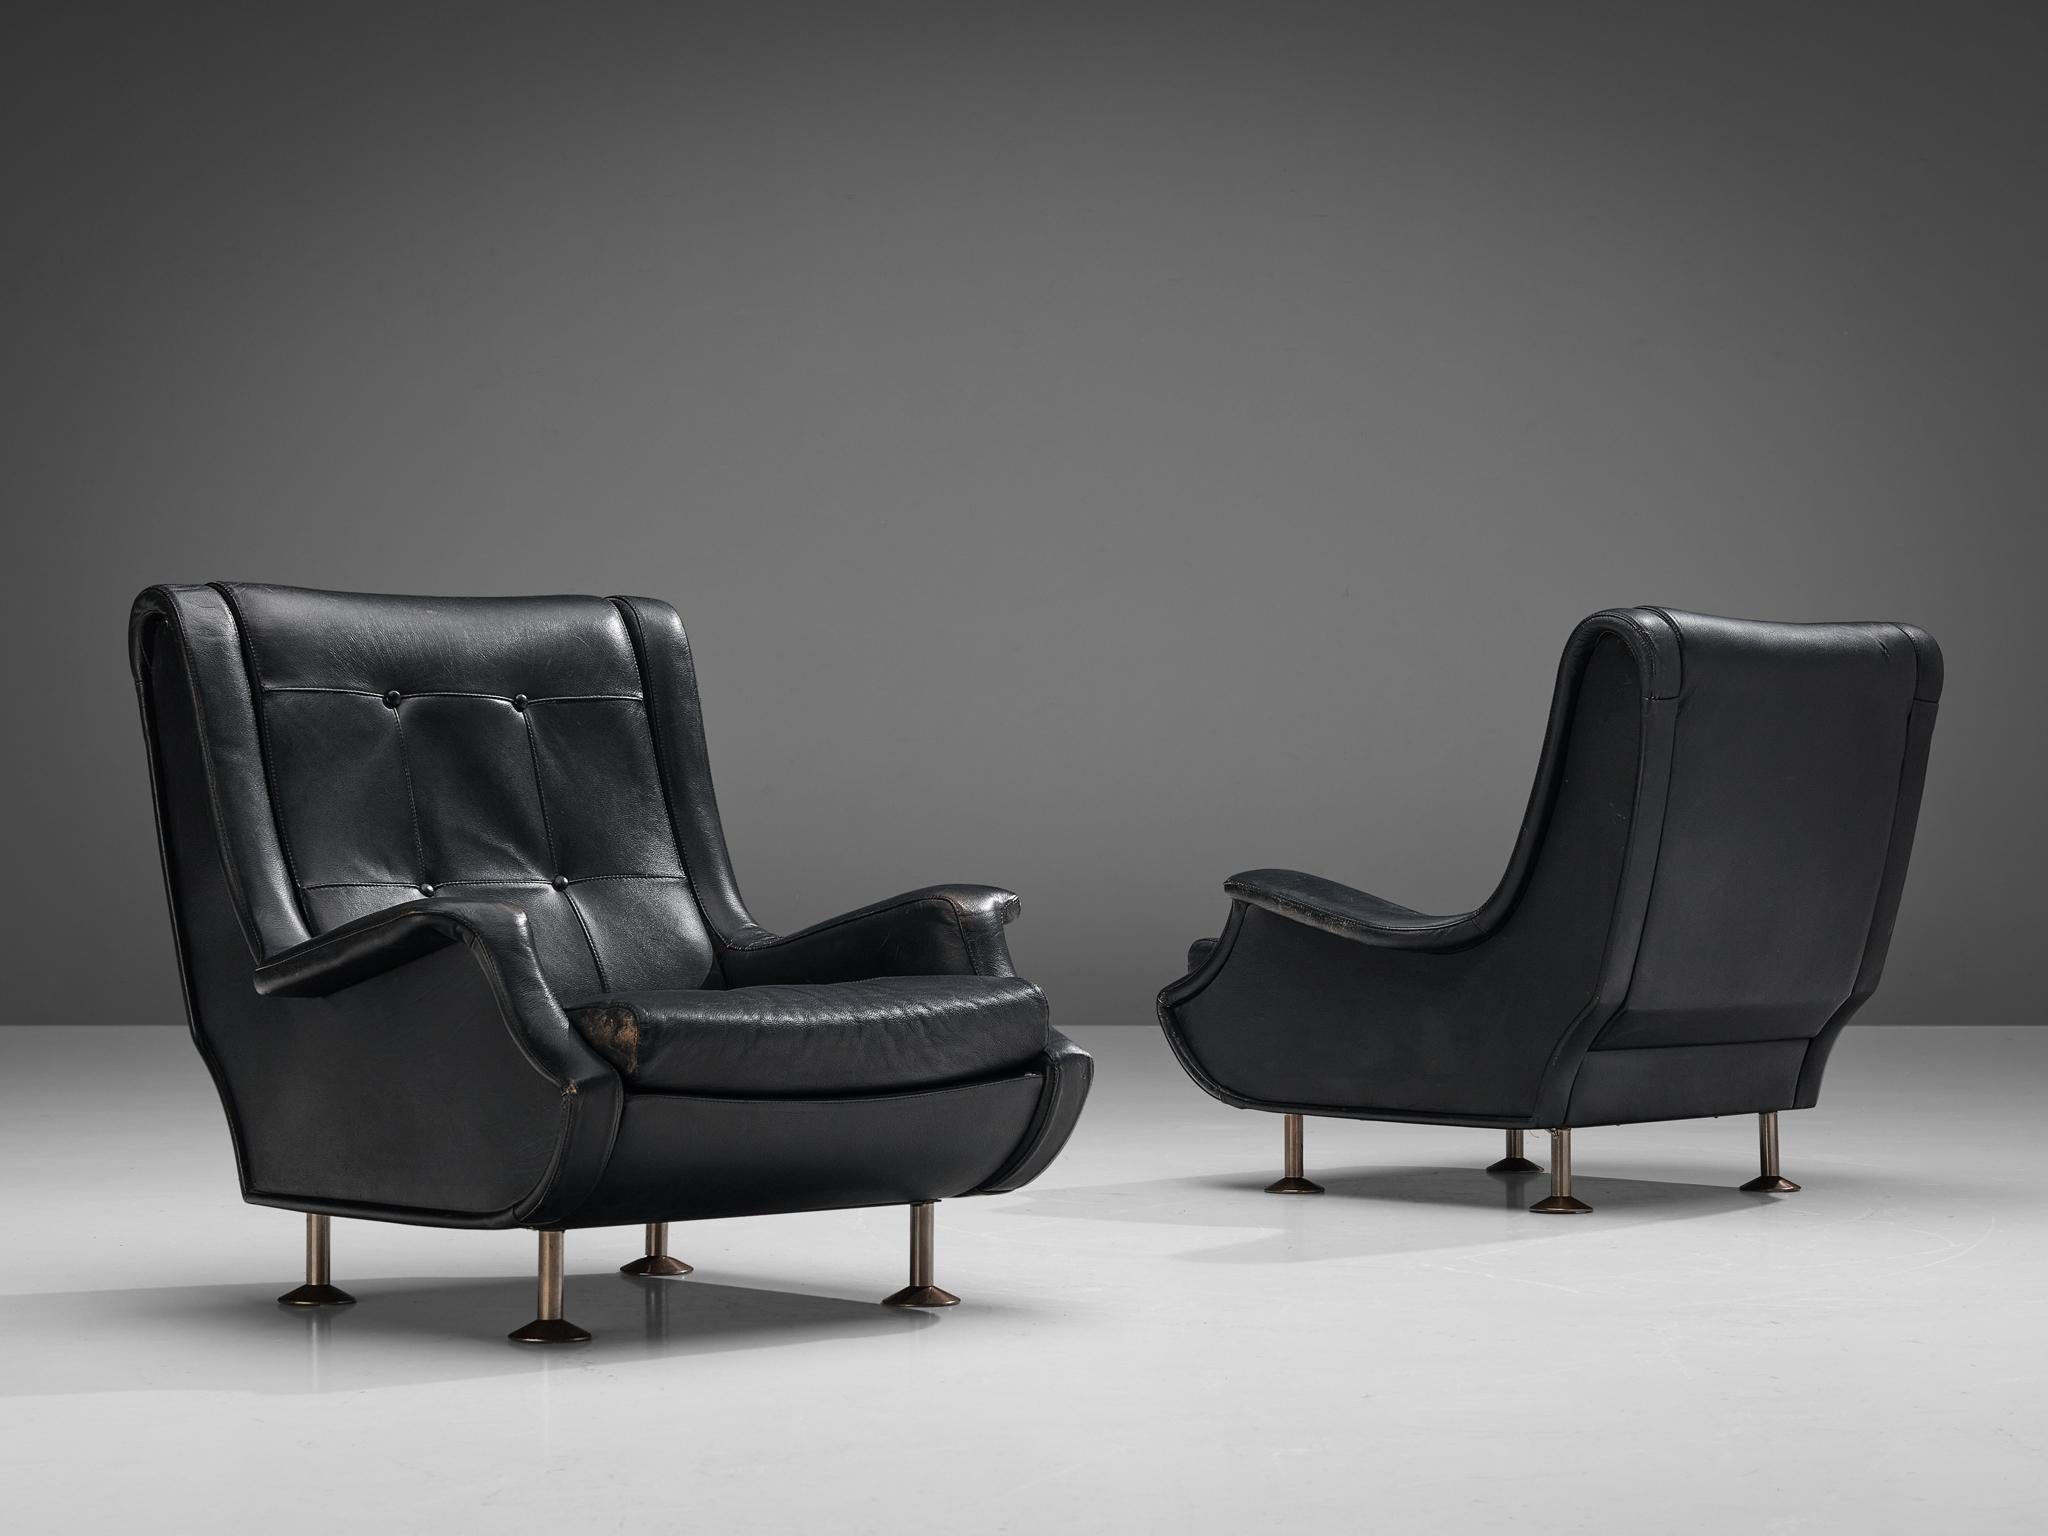 Marco Zanuso for Arflex, pair of lounge chairs, model 'Regent', leather, metal, Italy, designed in 1960

This admirable lounge chair named ‘Regent’ is designed by the talented Italian designer Marco Zanuso in 1960. Characteristic for this model are